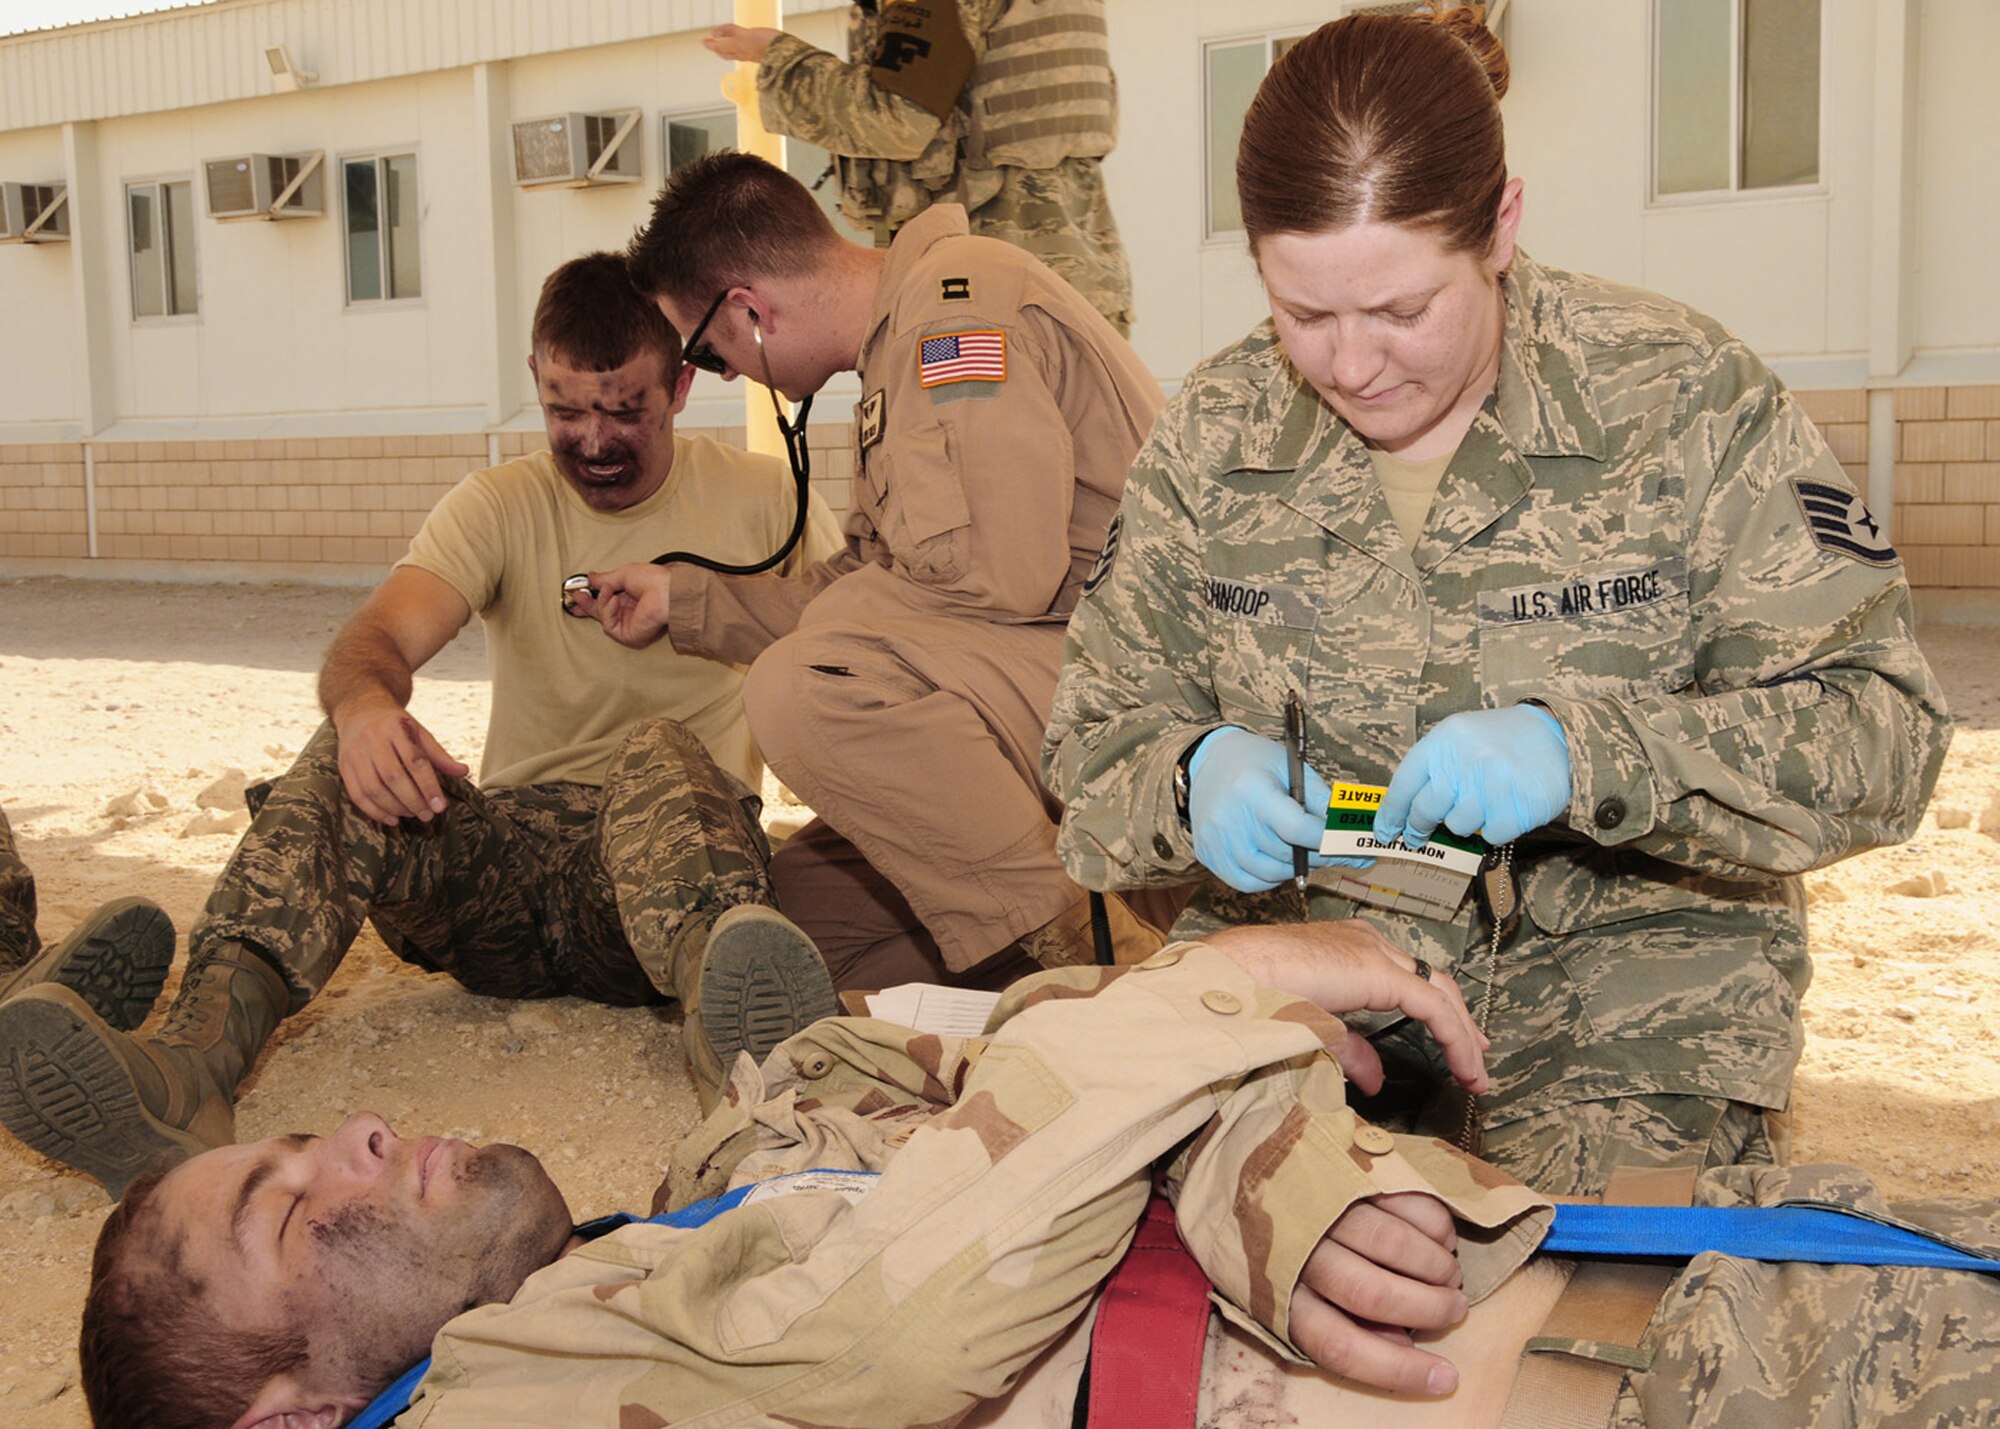 Staff Sgt. Betty Schnoop labels a simulated victim as immediate response due to a life threatening injury, while Capt. Layne Green checks the lungs of a simulated burn victim during a dorm fire exercise June 22 at an air base in Southwest Asia, June 22. A triage tag is a tool first responders and medical personnel use during mass casualty incidents to identify the victims and to prioritize the severity of their injury. Sergeant Schnoop is assigned to the 386th Expeditionary Medical Group and deployed from Wright-Patterson Air Force Base, Ohio. She is a native of Albany, N.Y. Captain Green is assigned to the 386th Expeditionary Medical Group and deployed from Brooks City-Base, Texas. He is a native of Meridian, Idaho. (U.S. Air Force photo/Senior Airman Courtney Richardson)